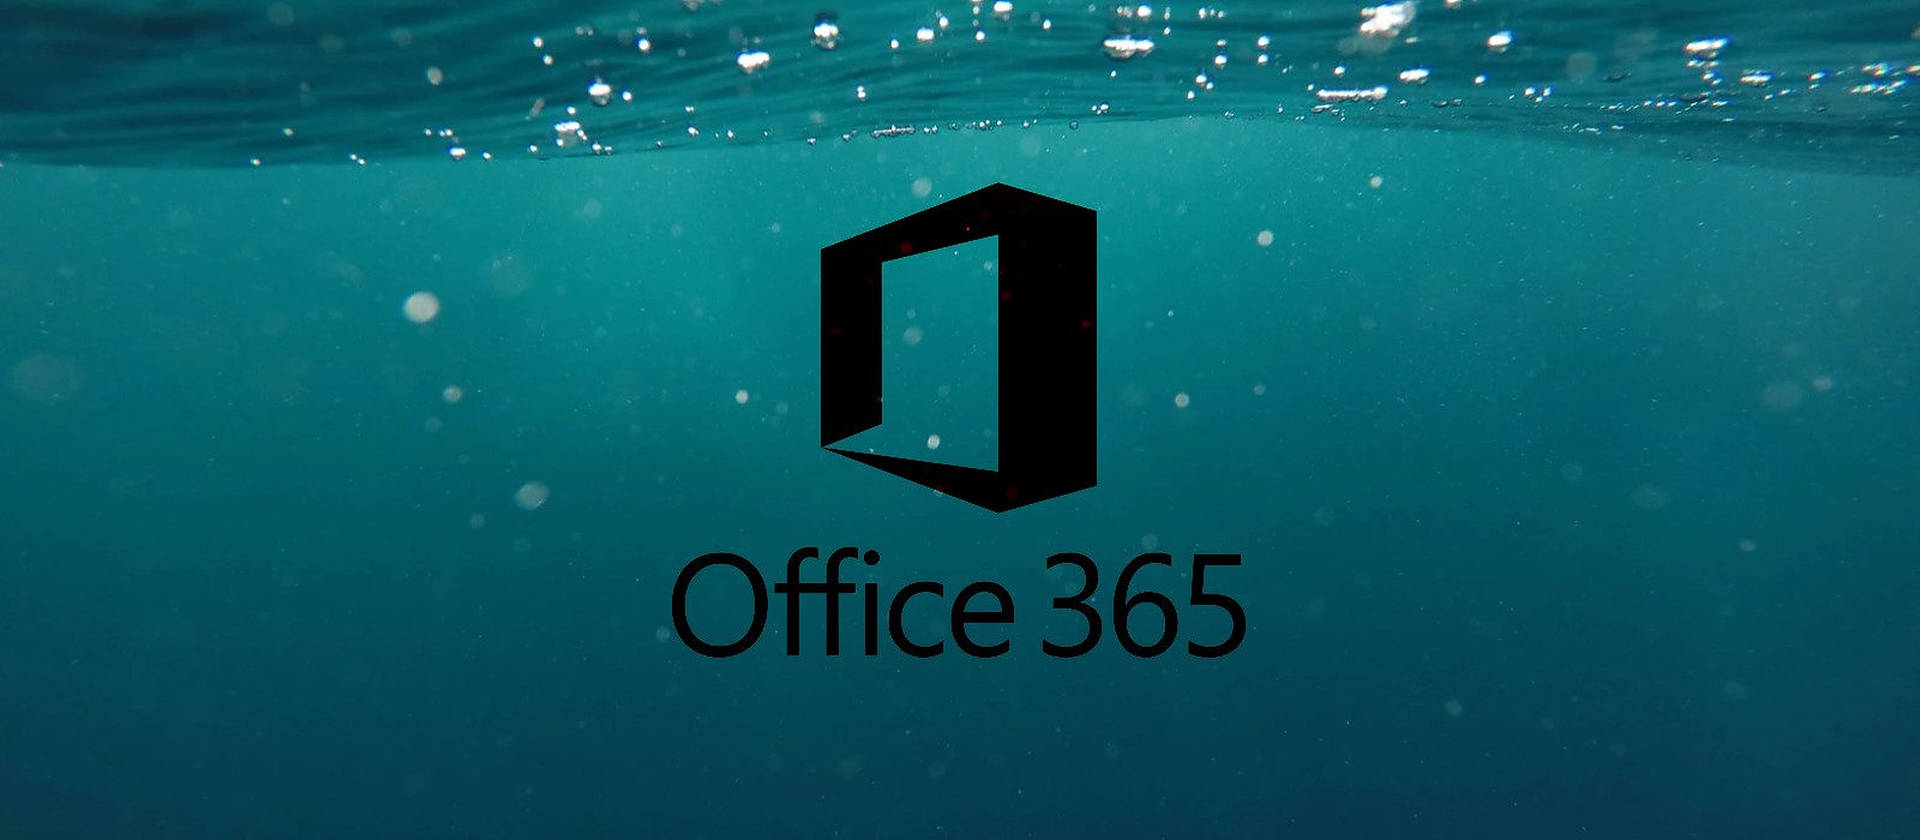 Office 365 Teal Poster Wallpaper